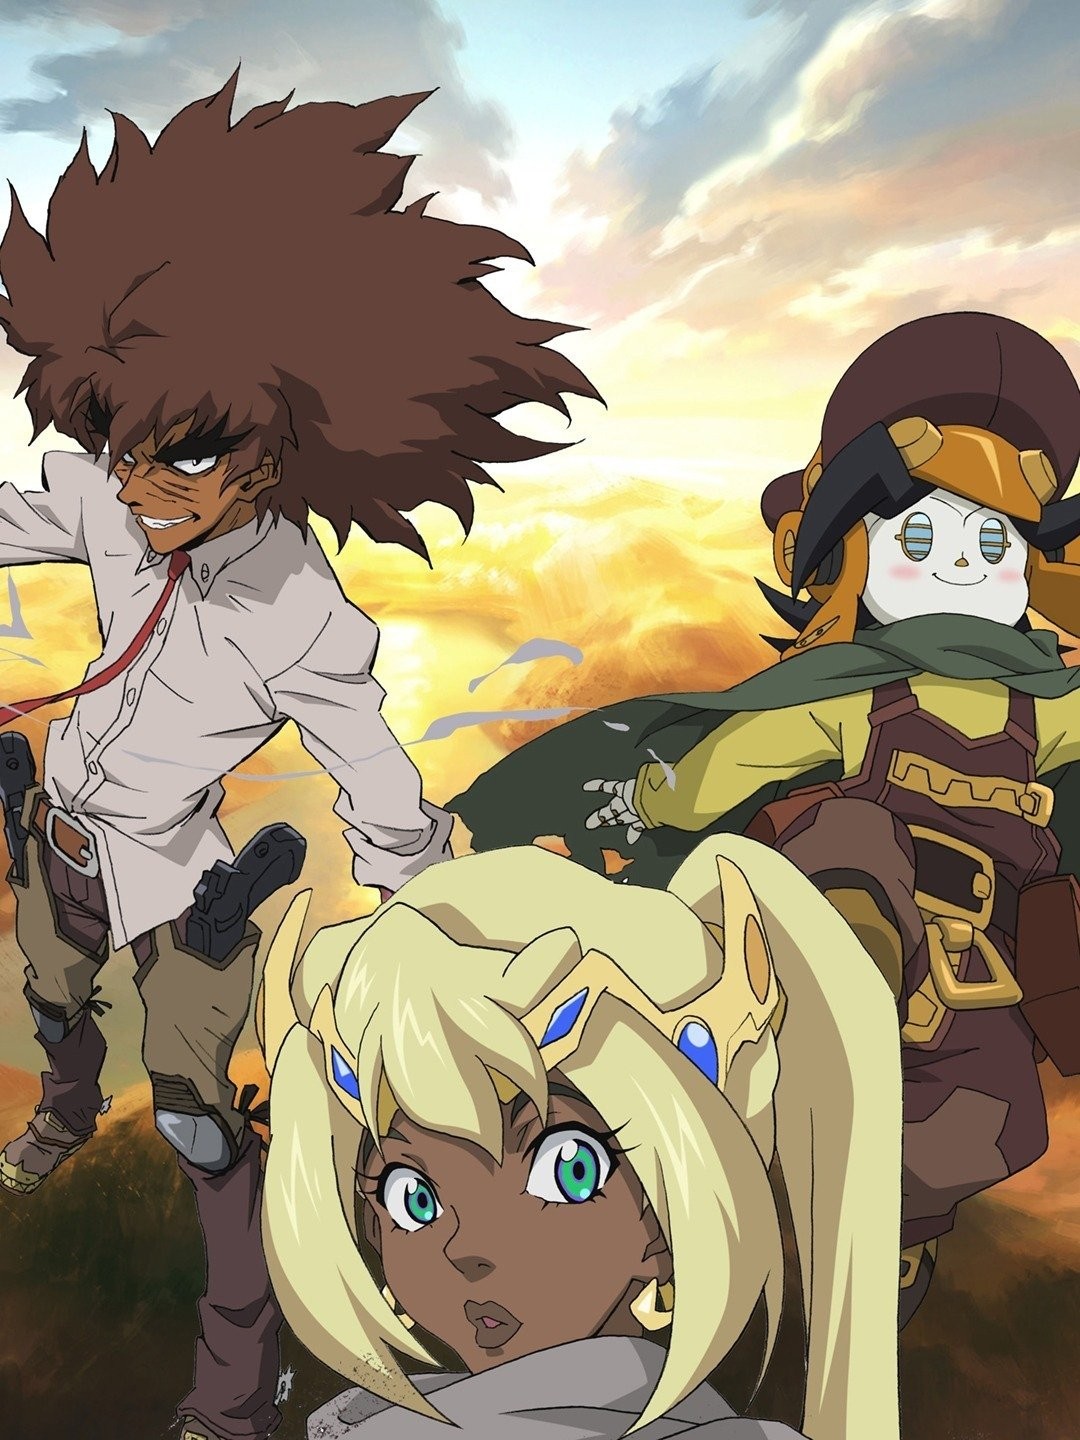 Cannon Busters' Review: Netflix Anime Series Is a '90s Throwback